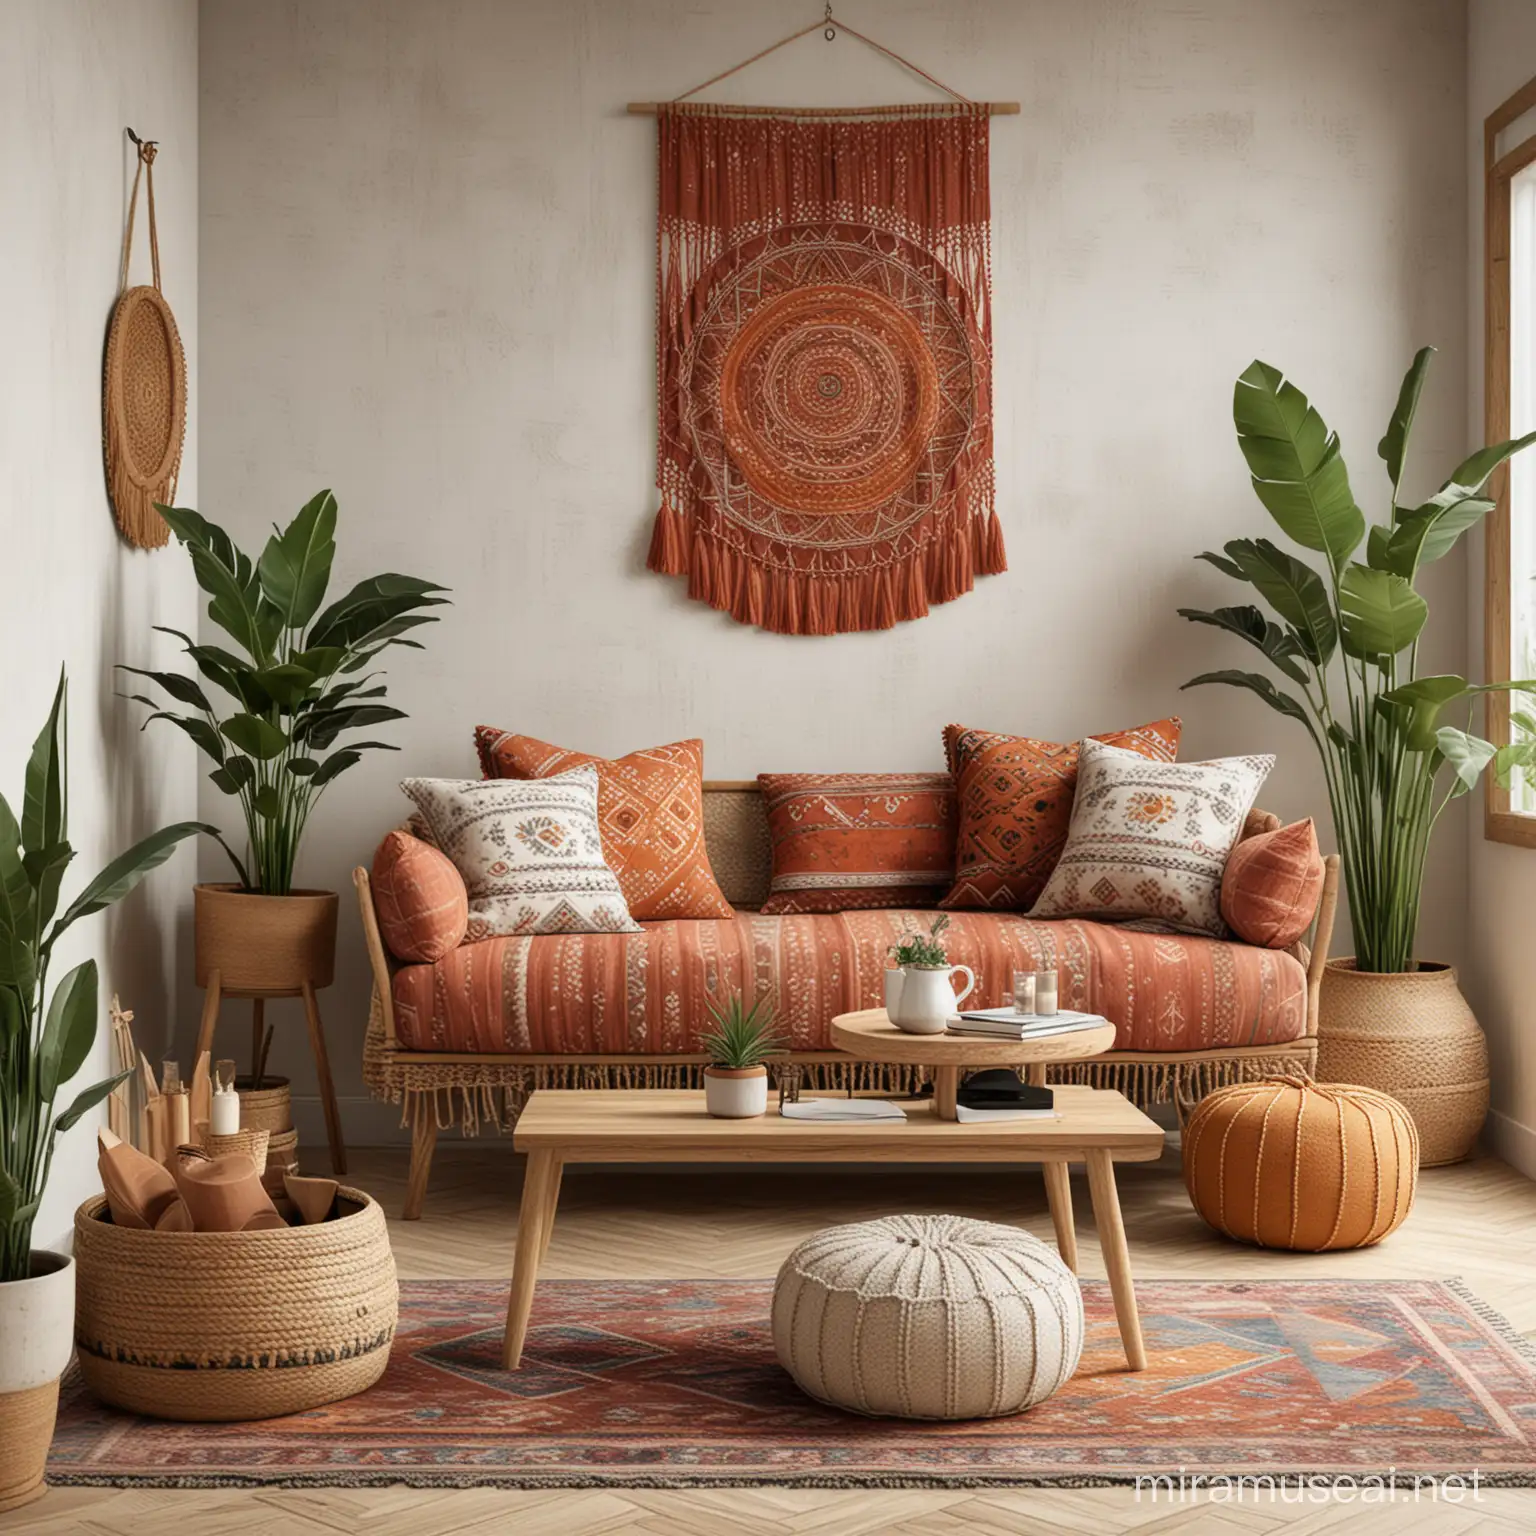 Bohemian Interior Mockup with Cozy Furniture and Vibrant Textures